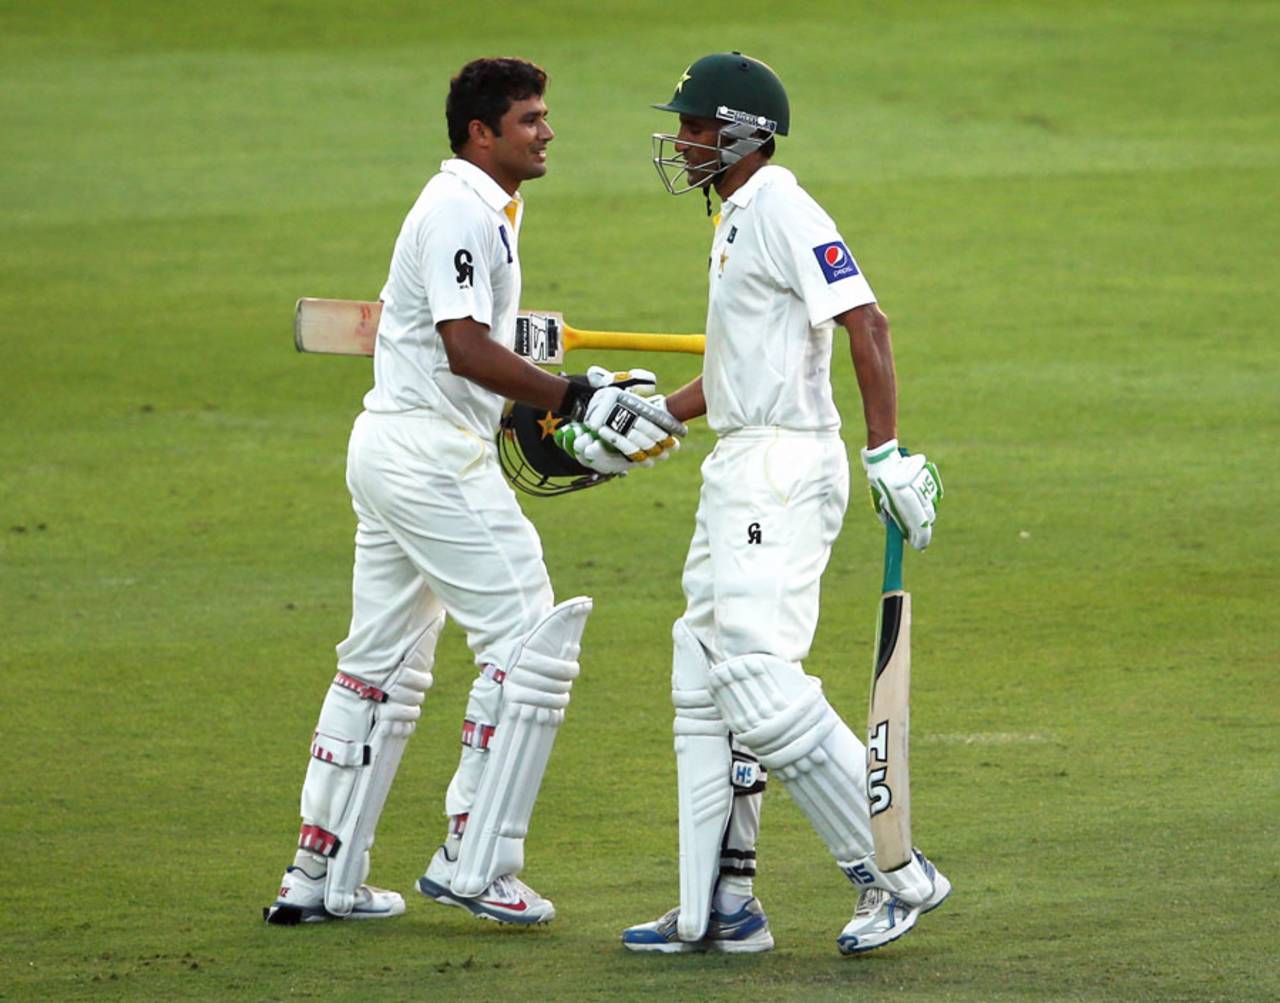 Azhar Ali and Younis Khan both hit centuries as Pakistan bossed the first day&nbsp;&nbsp;&bull;&nbsp;&nbsp;Getty Images